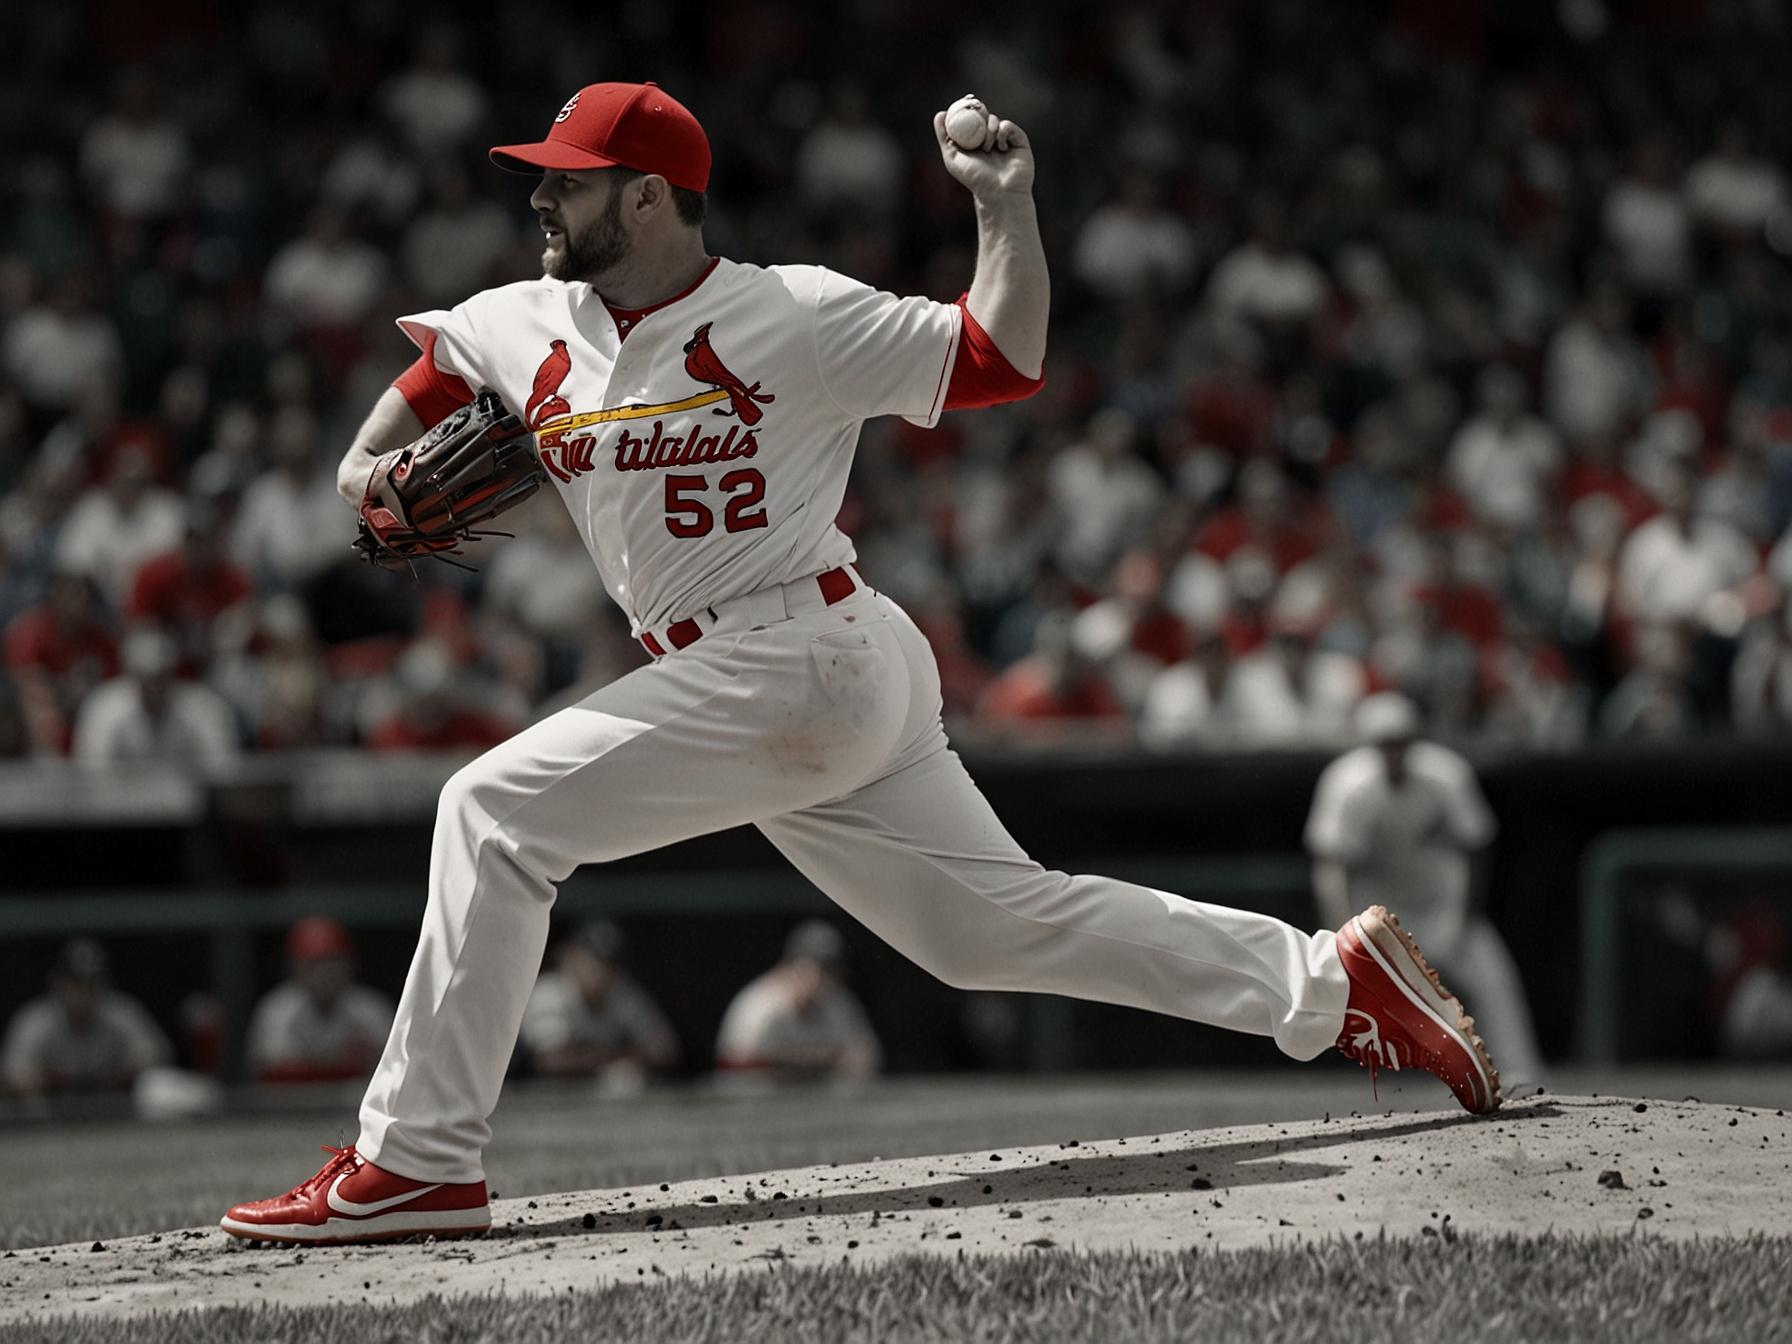 St. Louis Cardinals' pitcher successfully delivers a crucial pitch in the bottom of the 12th inning, helping to secure the team's dramatic win against the Miami Marlins.